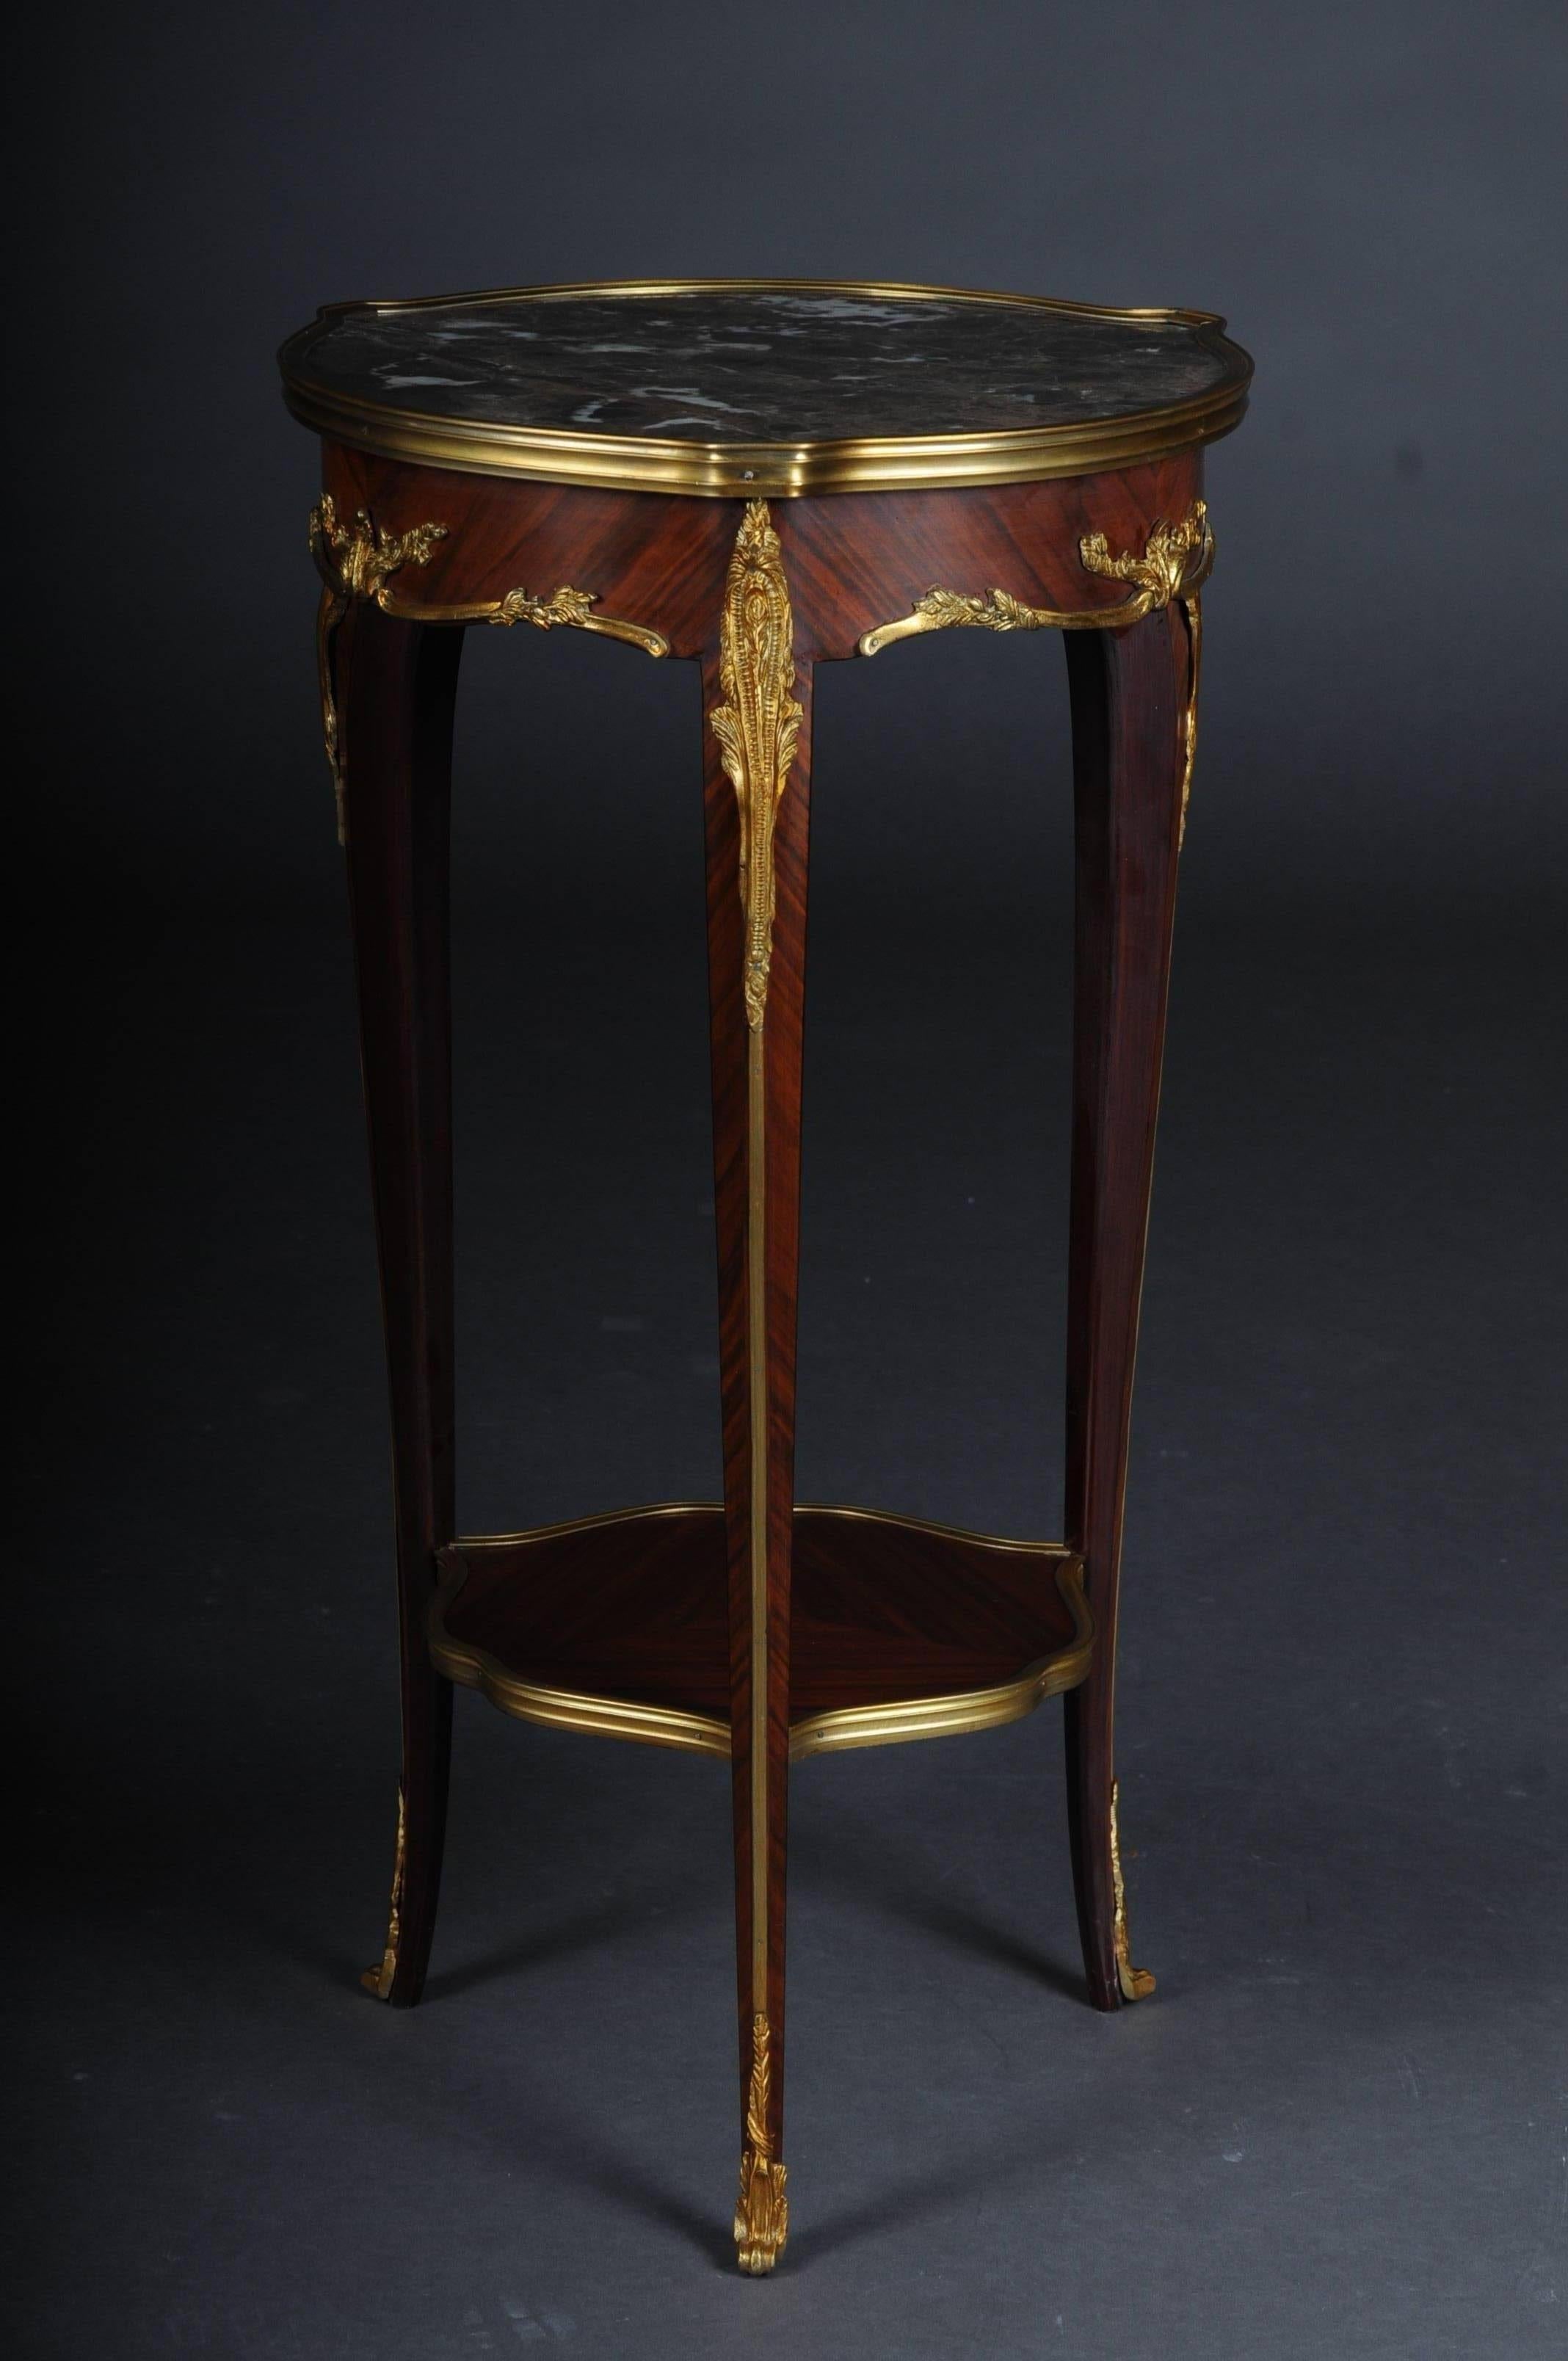 20th Century French Salon Side Table in Louis Quinze